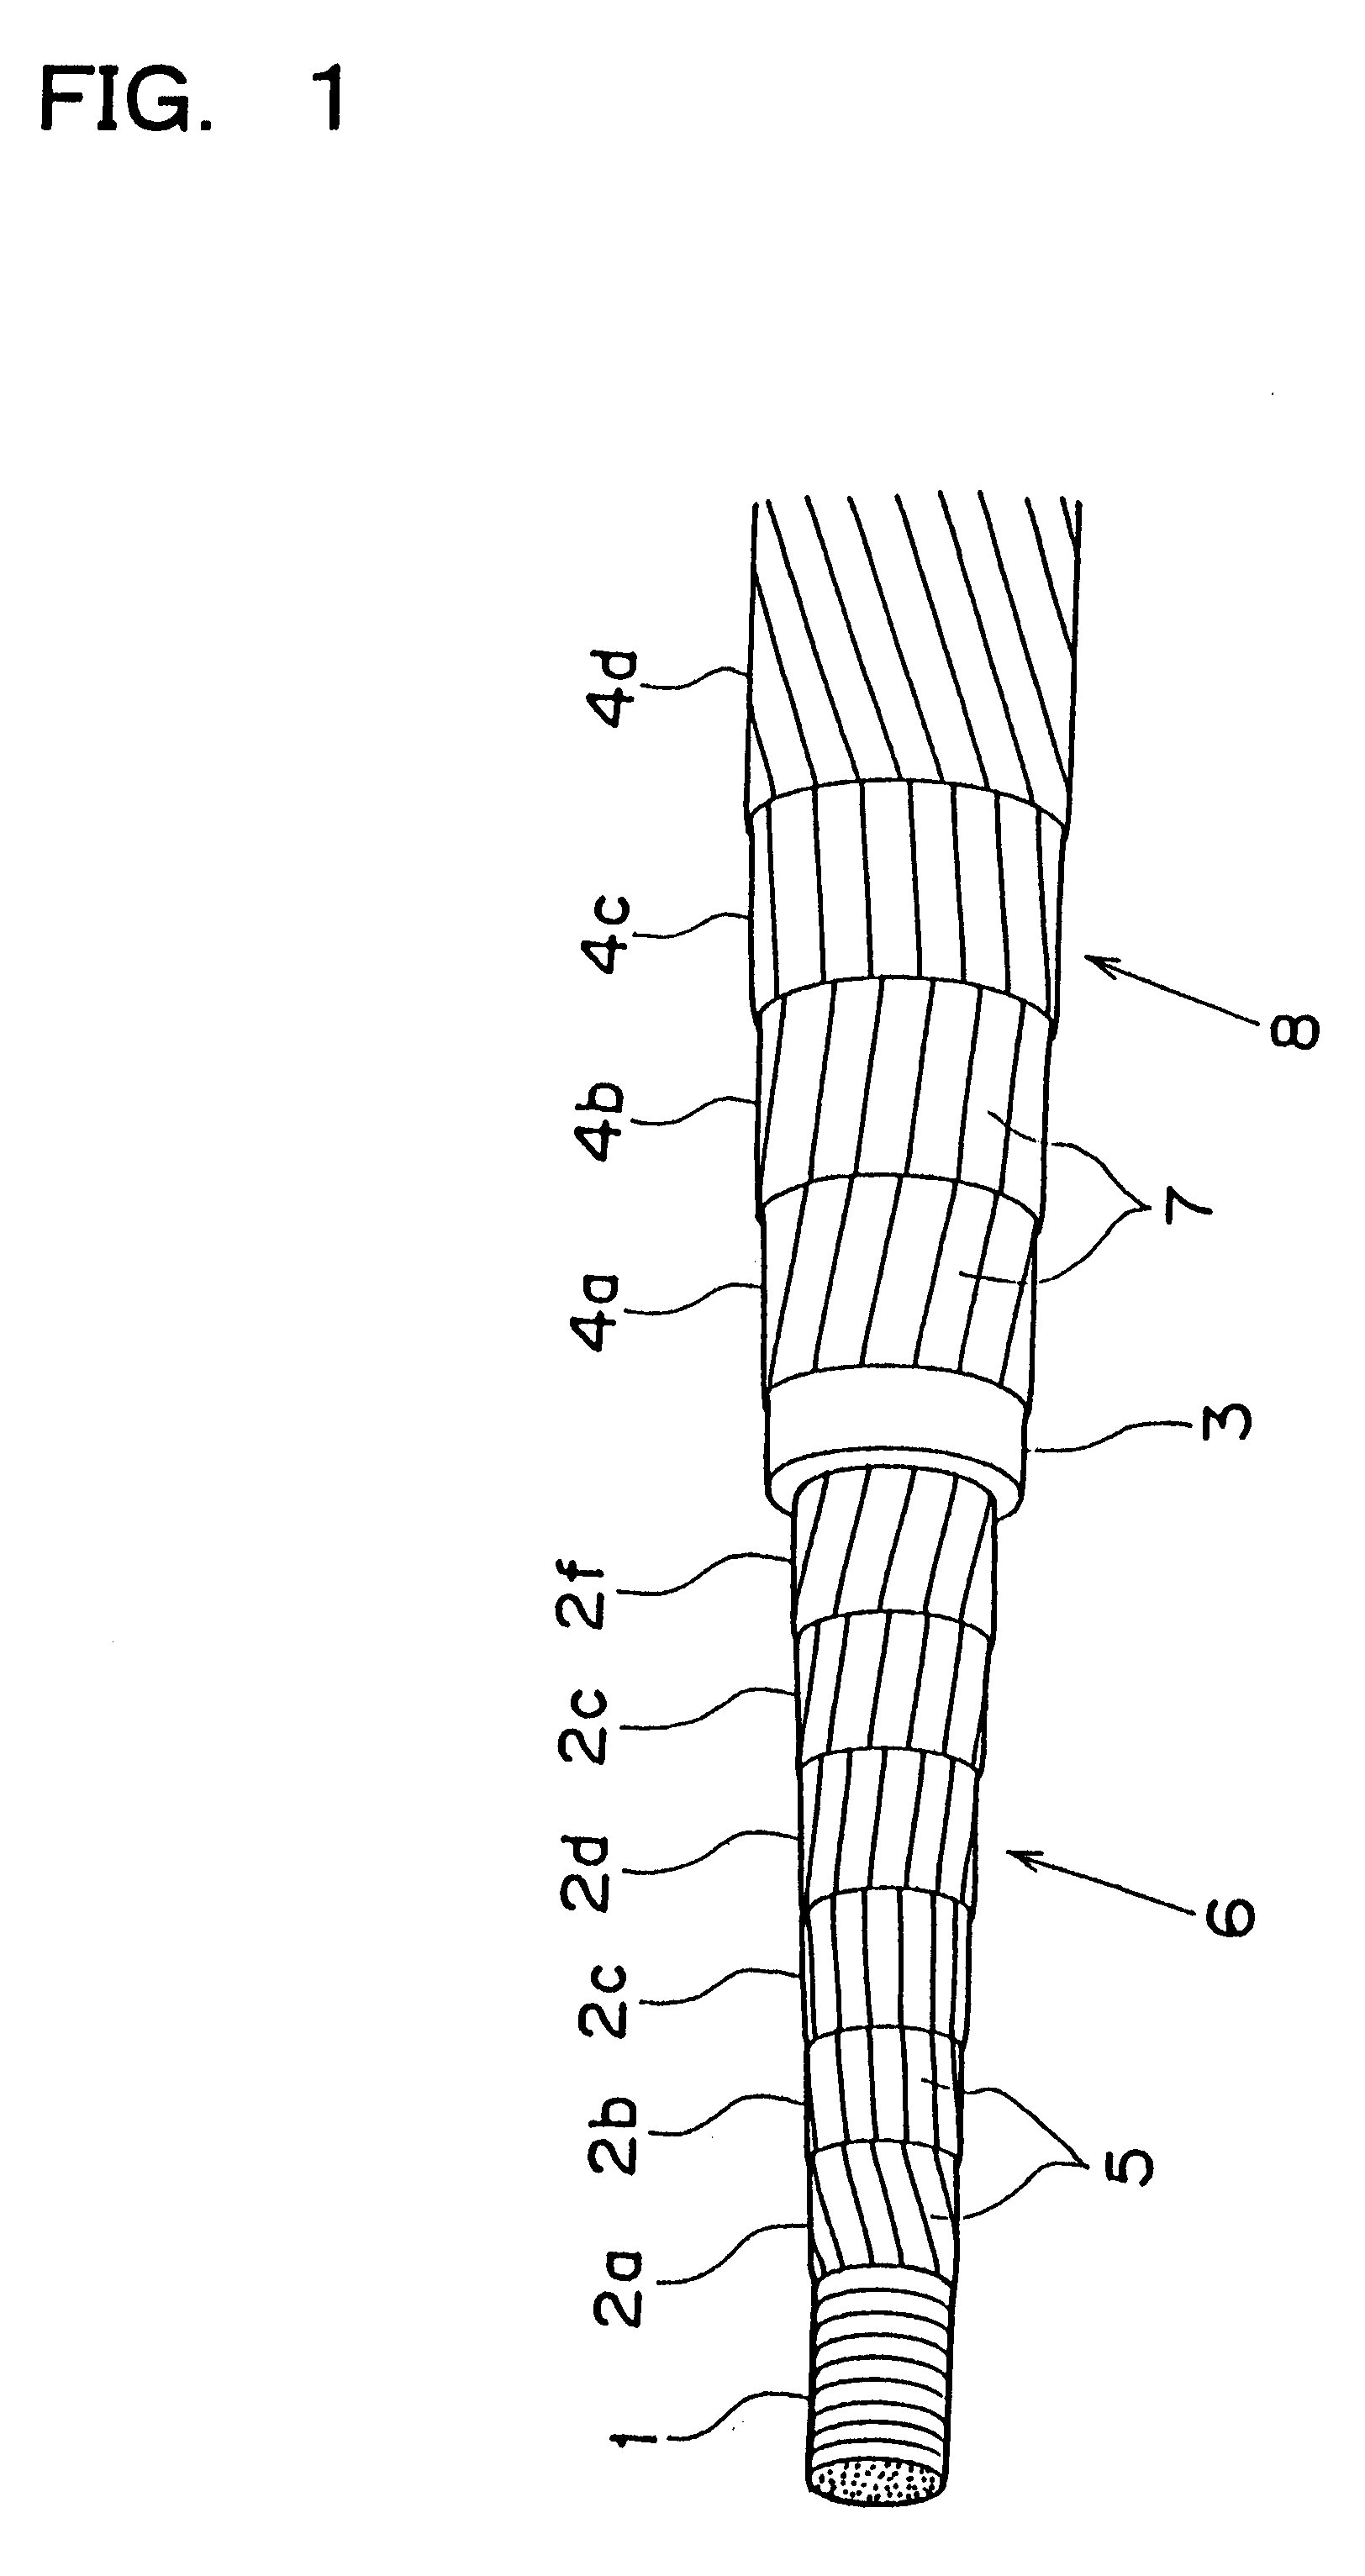 Superconducting cable for alternating current